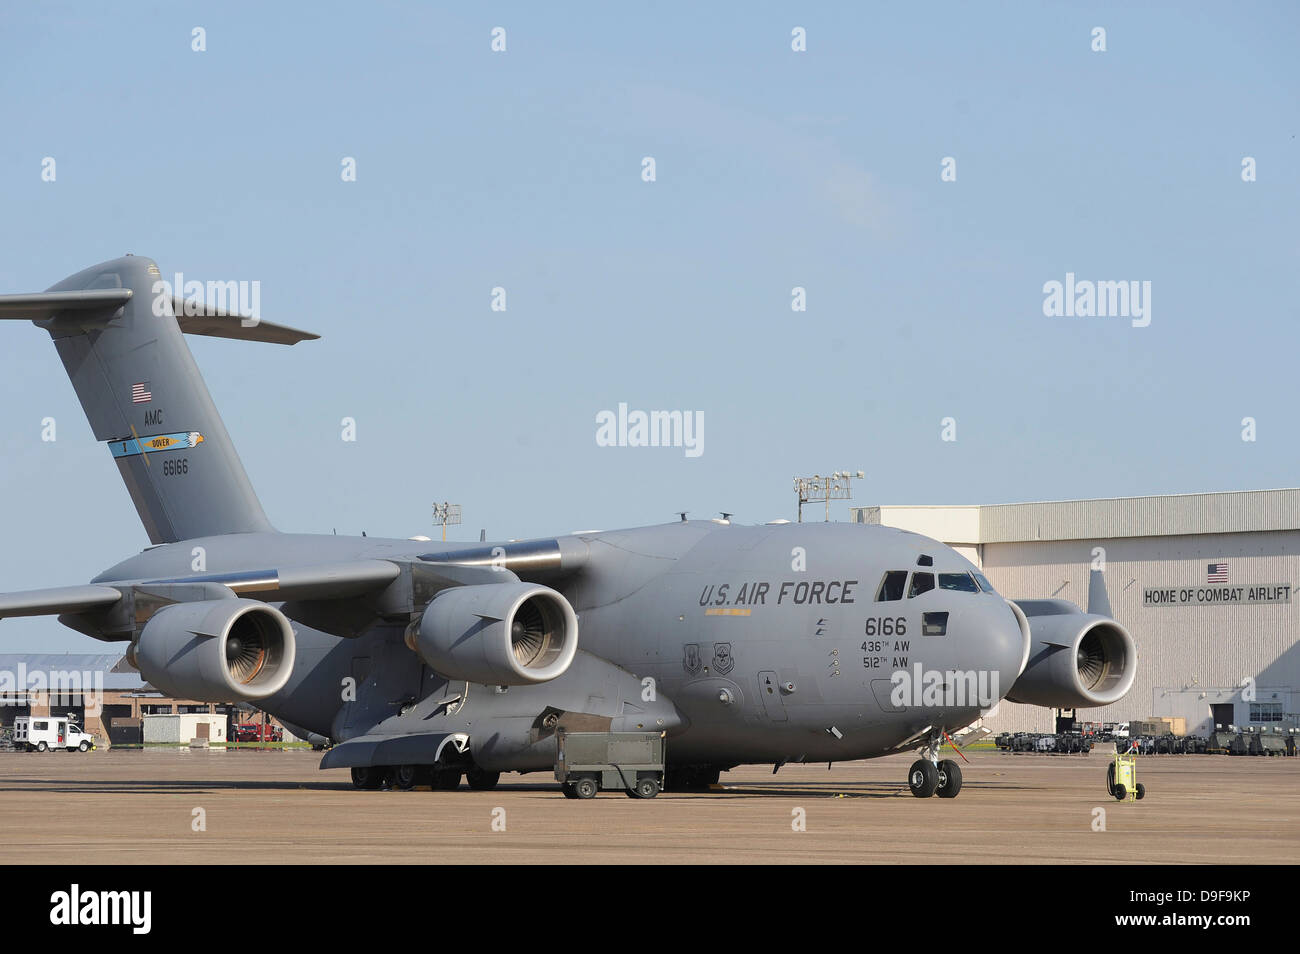 August 27, 2011 - A C-17 Globemaster III is parked on a ramp at Little Rock Air Force Base, Arkansas. Stock Photo